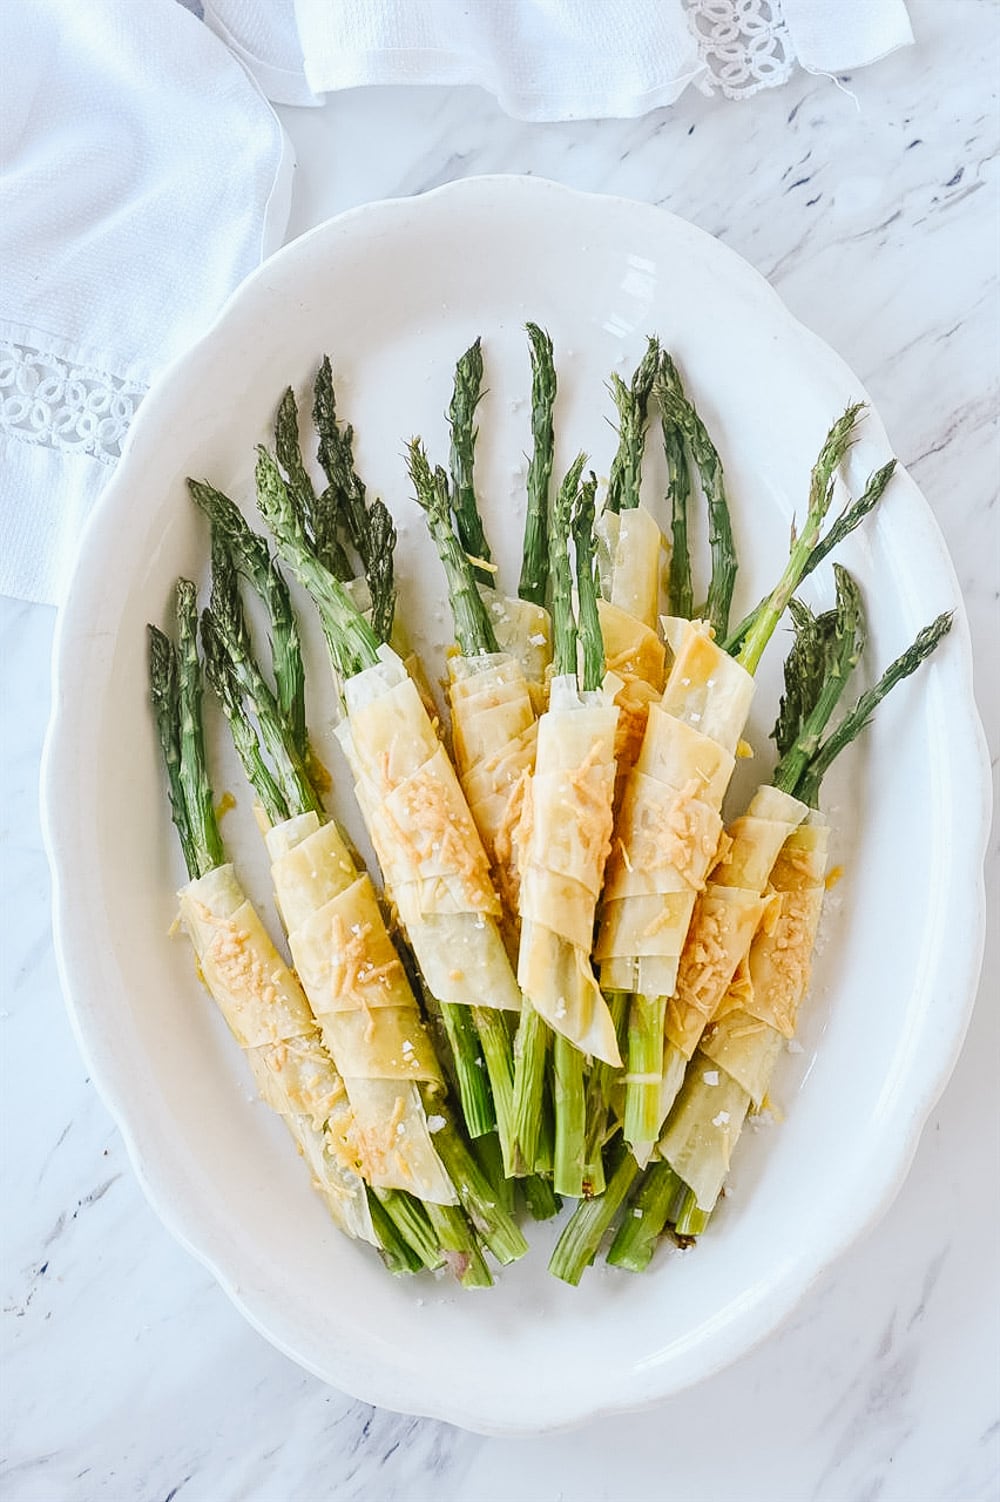 phyllo wrapped asparagus on a plate